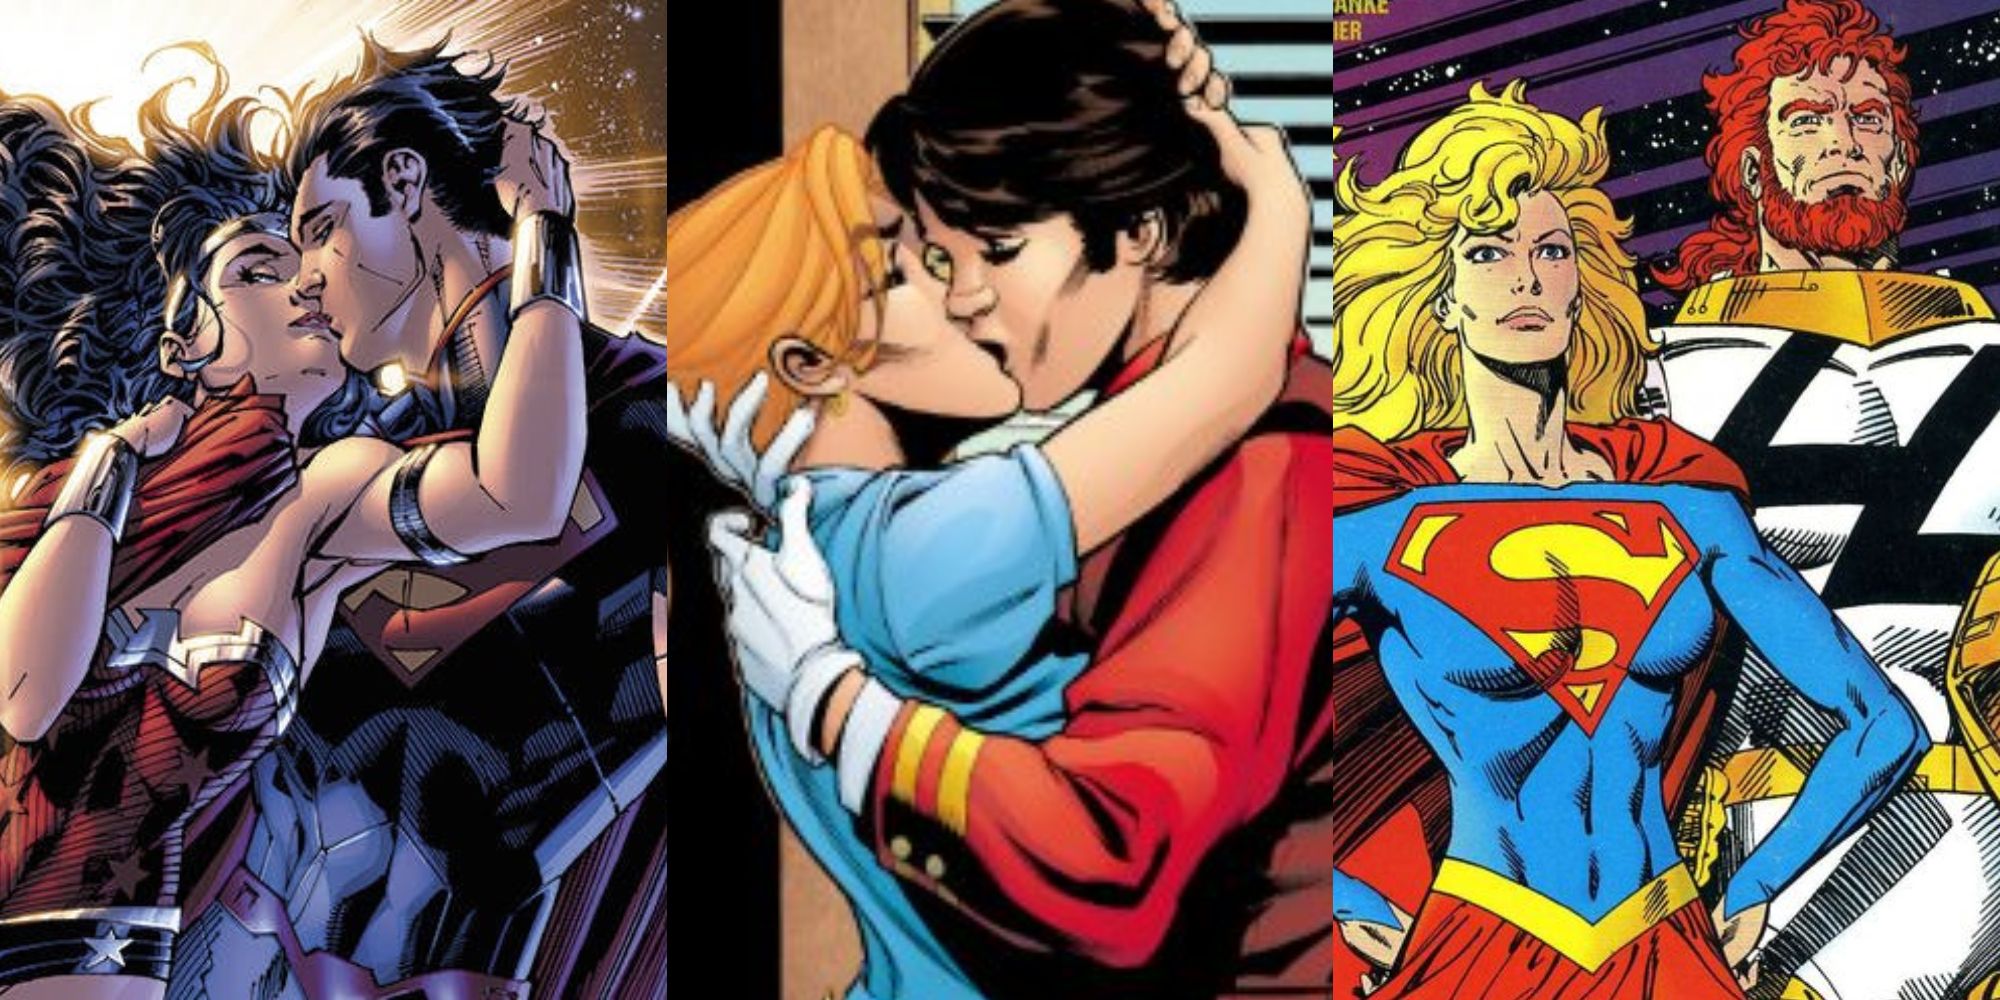 Collage image of Superman kissing Wonder Woman, Agent 355 kissing Yorick, and a clone of Supergirl standing beside a clone of Lex Luthor.